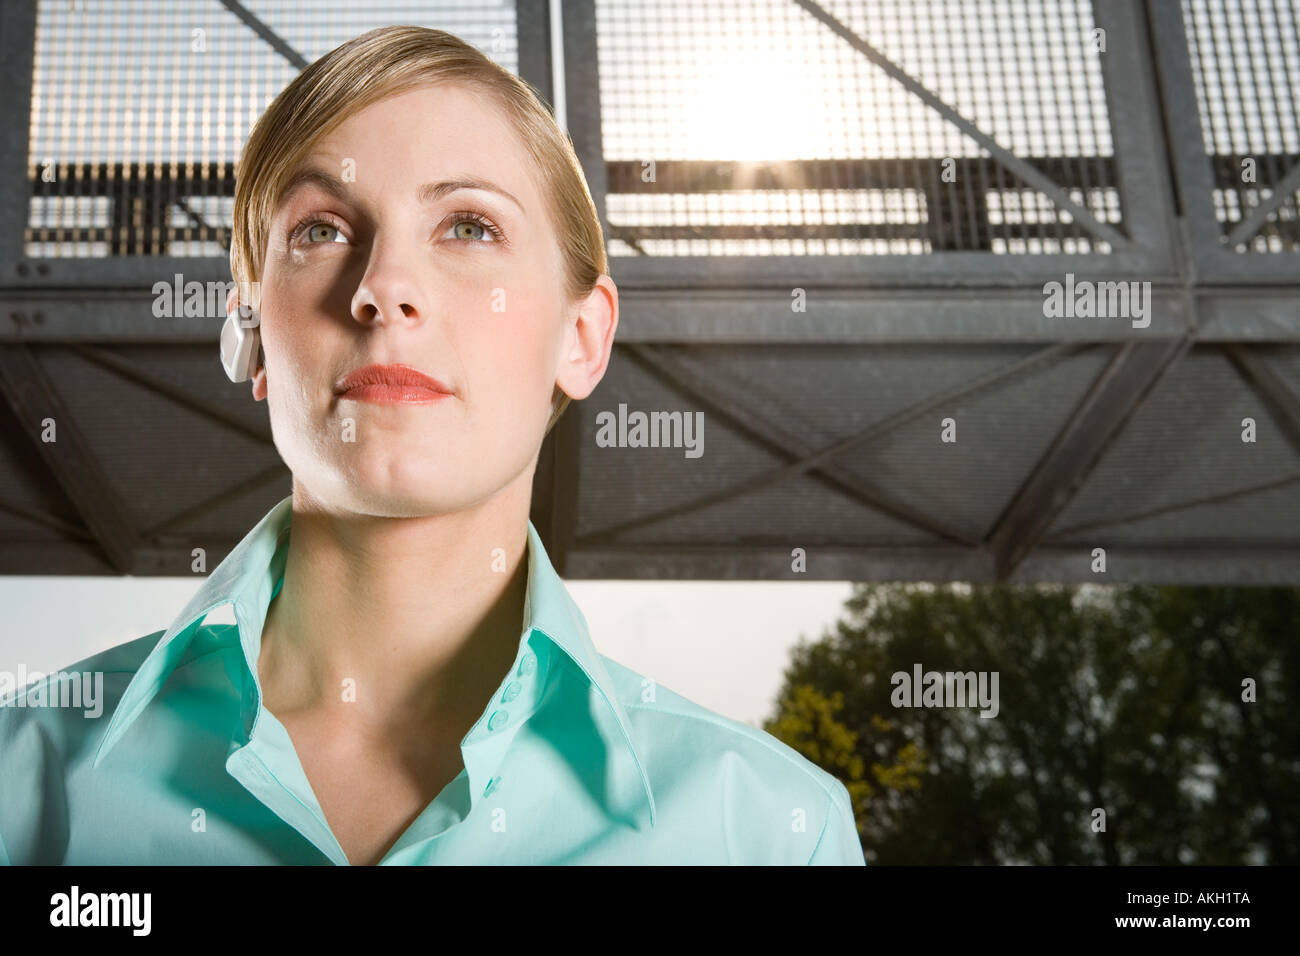 Woman wearing headset standing outdoors Stock Photo